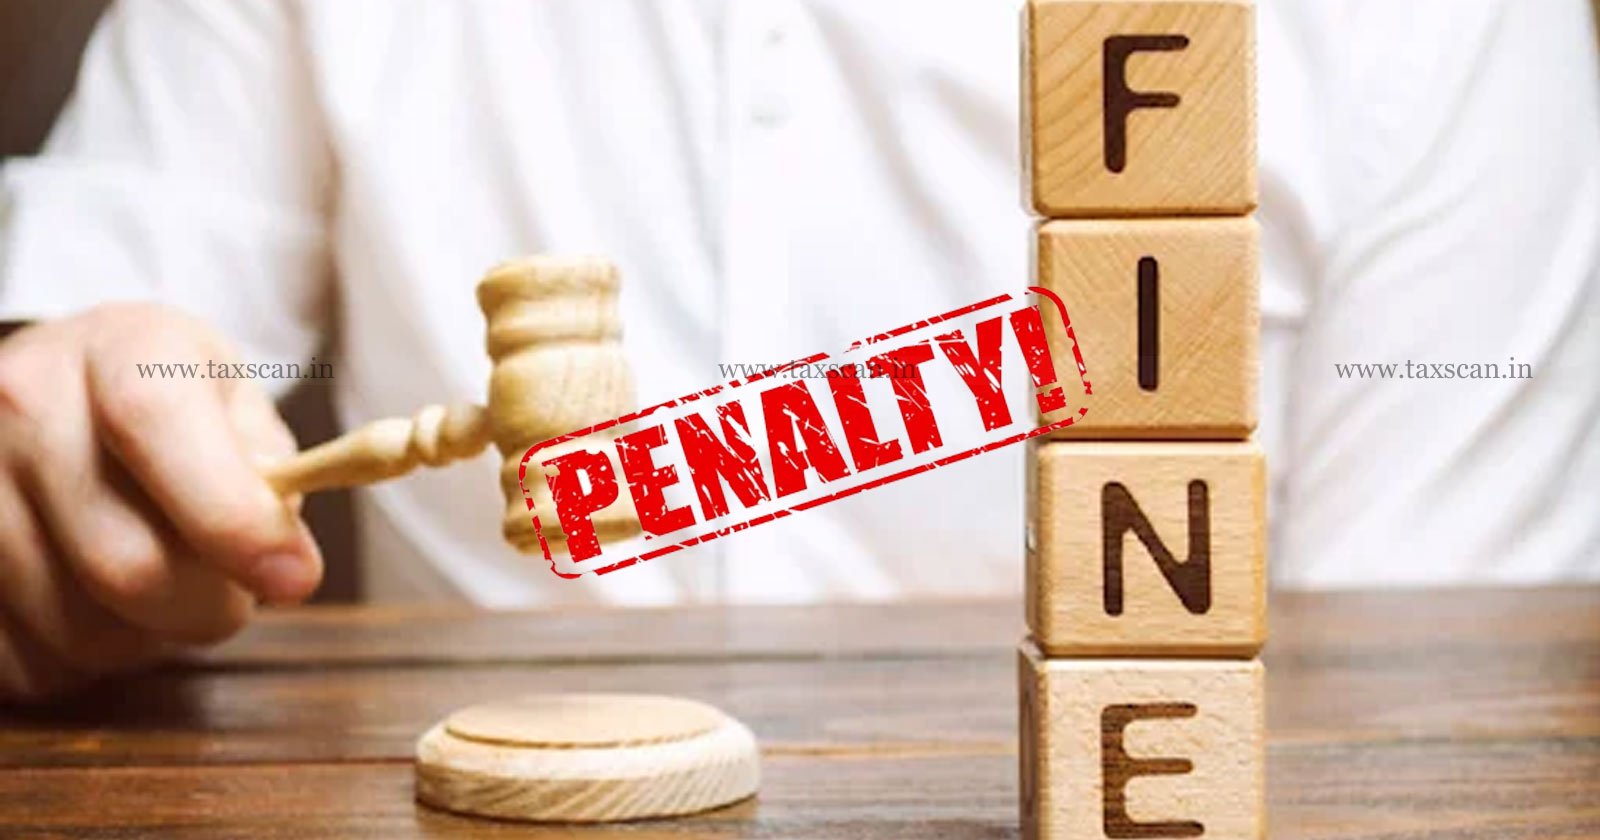 Quashing of penalties - CESTAT - Excise Penalty - Clandestine Removal of Goods - taxscan